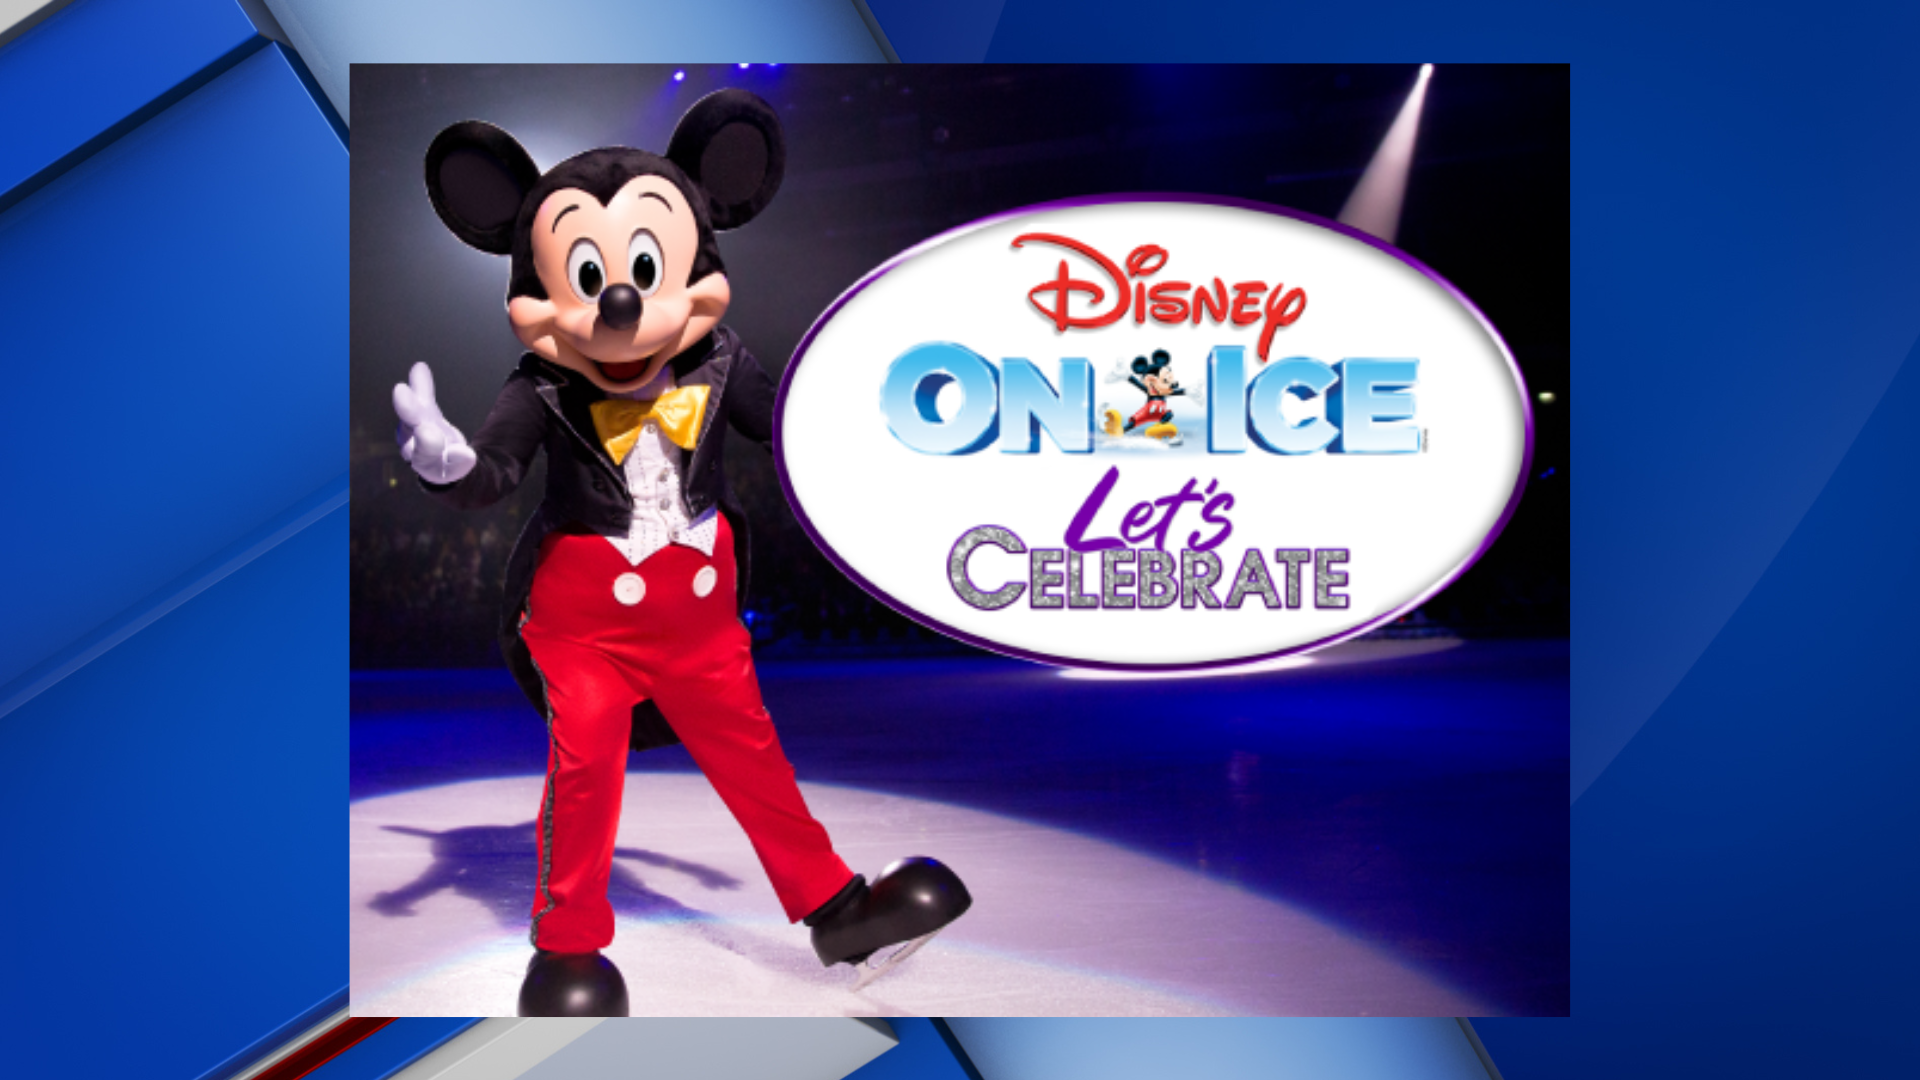 Disney On Ice comes to Tupelo's newly renamed Cadence Bank Arena